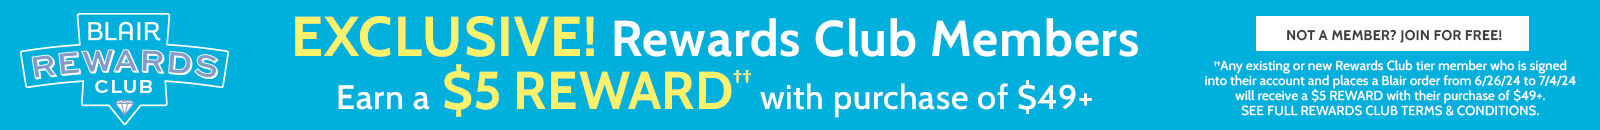 blair rewards club exclusive! rewards club members earn a $5 reward†† with purchase of $49+ not a member? join for free ††any existing or new rewards club tier member who is signed into their account and places a Blair order from 6/26/24 to 7/4/24 will receive a $5 reward with their purchase of $49+. see full rewards terms & conditions.